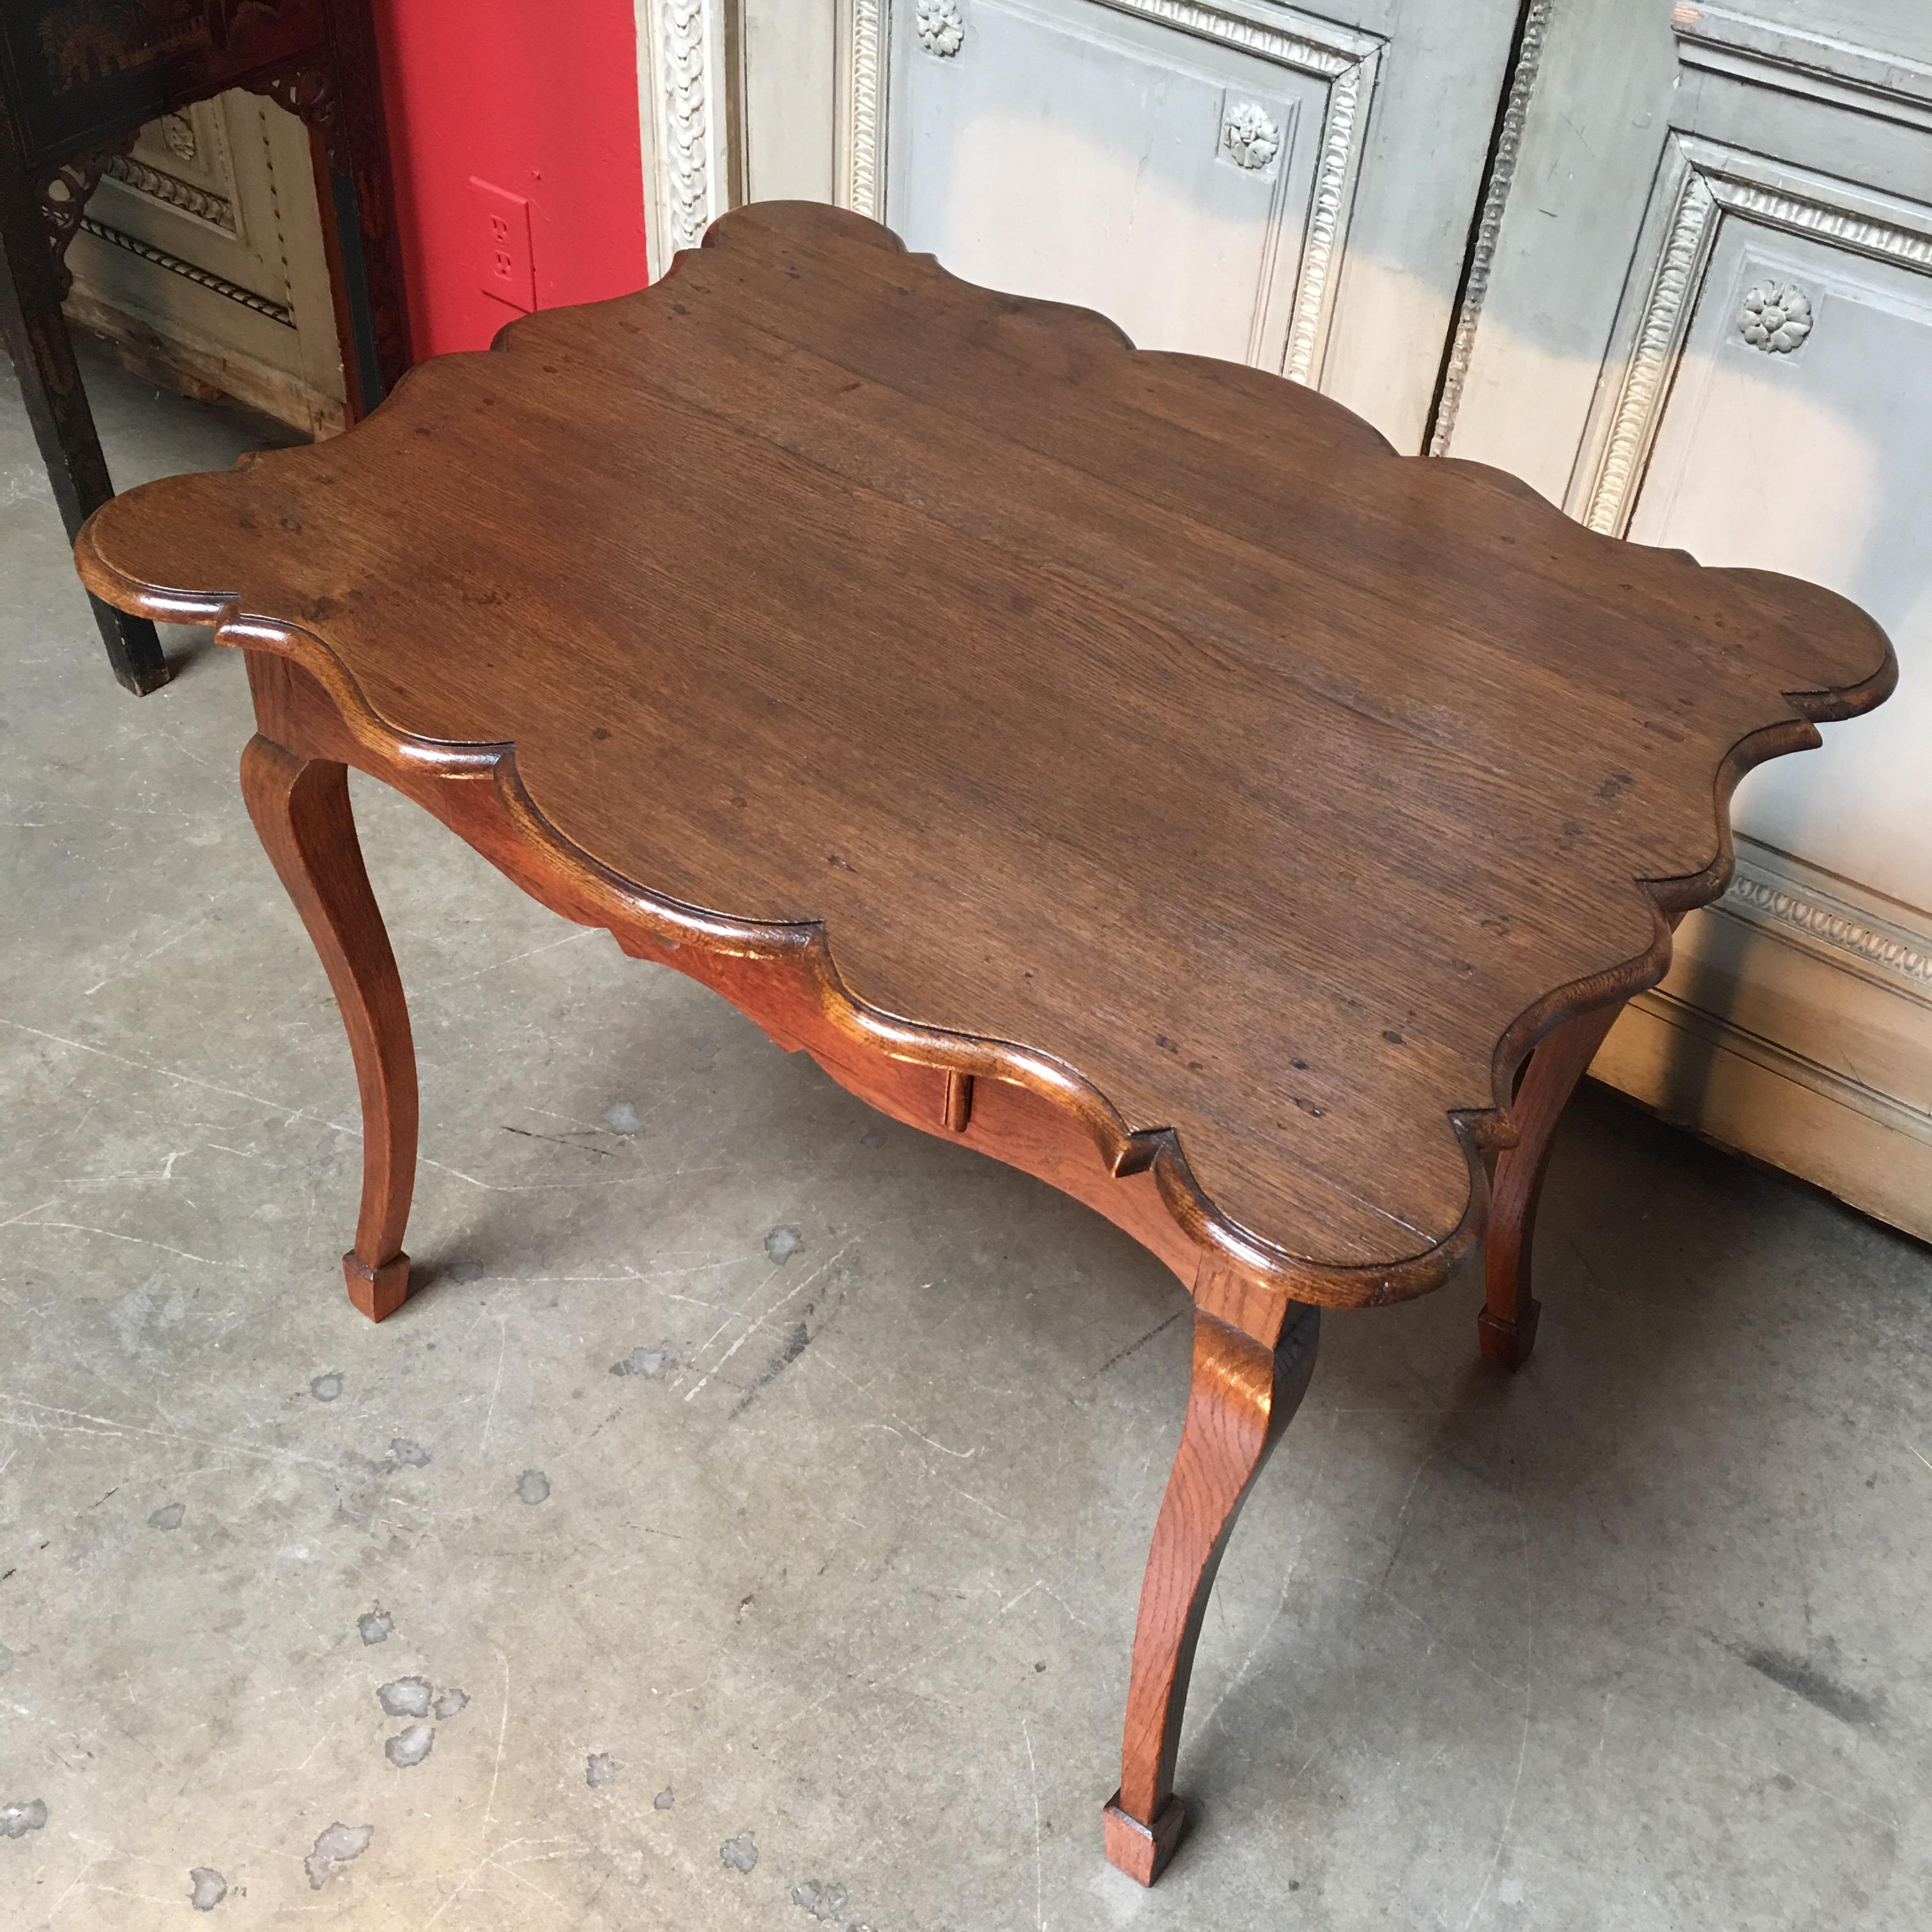 An 18th century French country Louis XV style writing table-end table. This lovely oak table features a scalloped shaped top, one drawer and cabriole legs. 